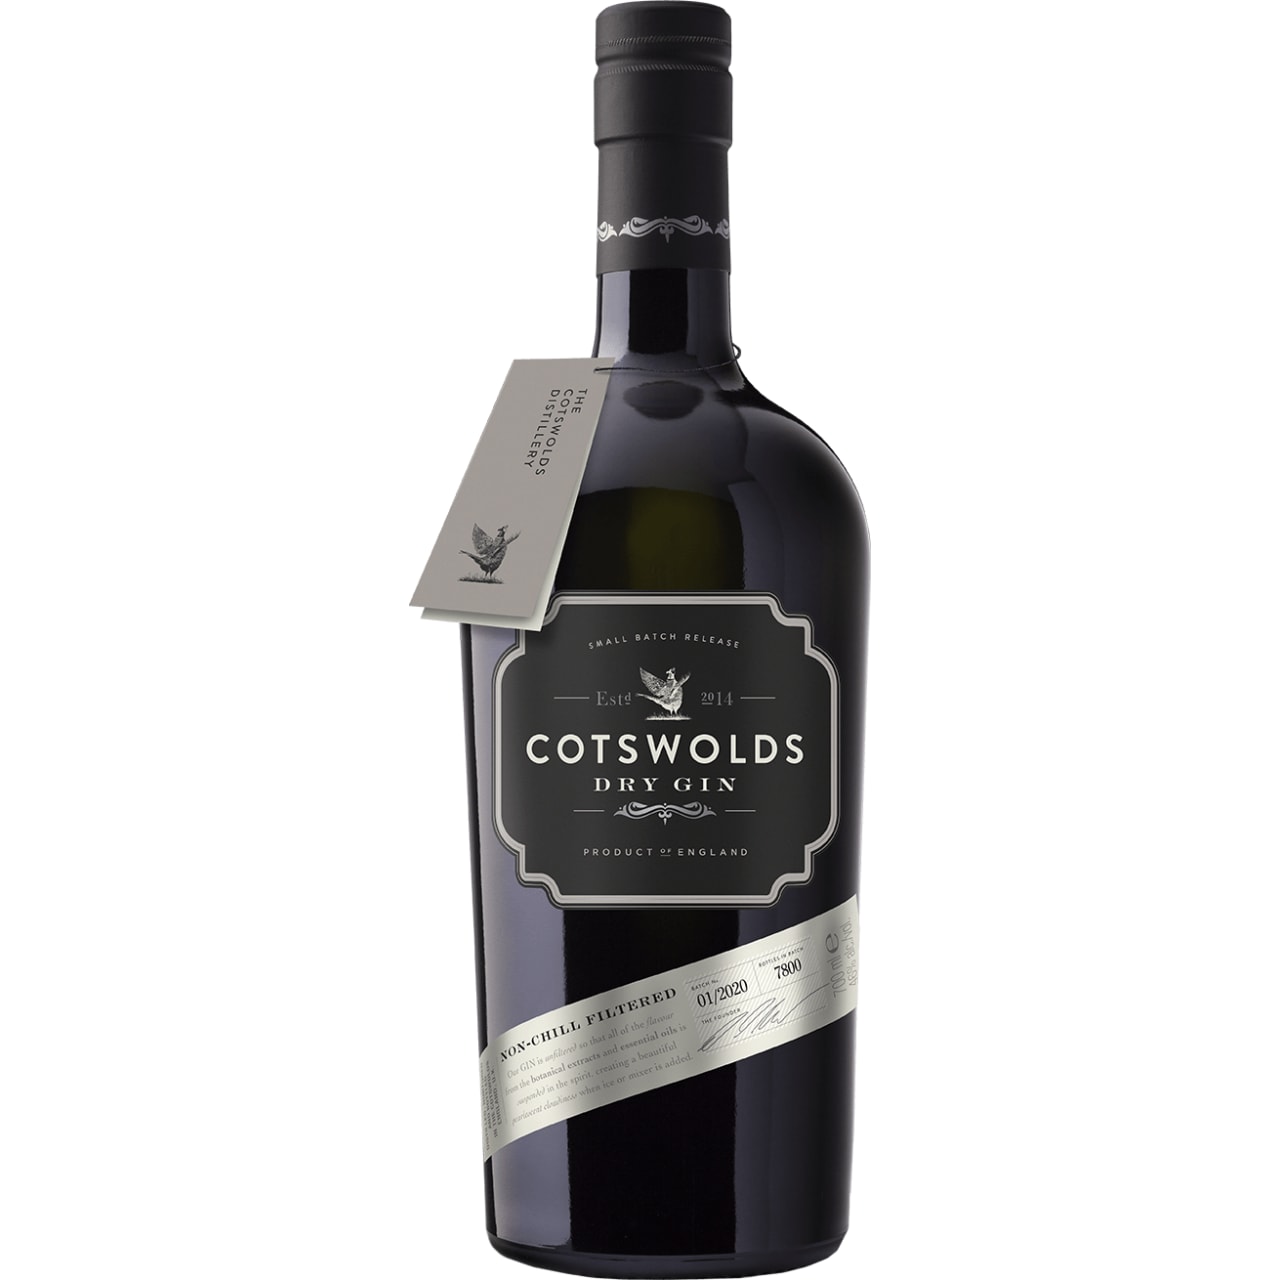 Product Image - Cotswolds Dry Gin